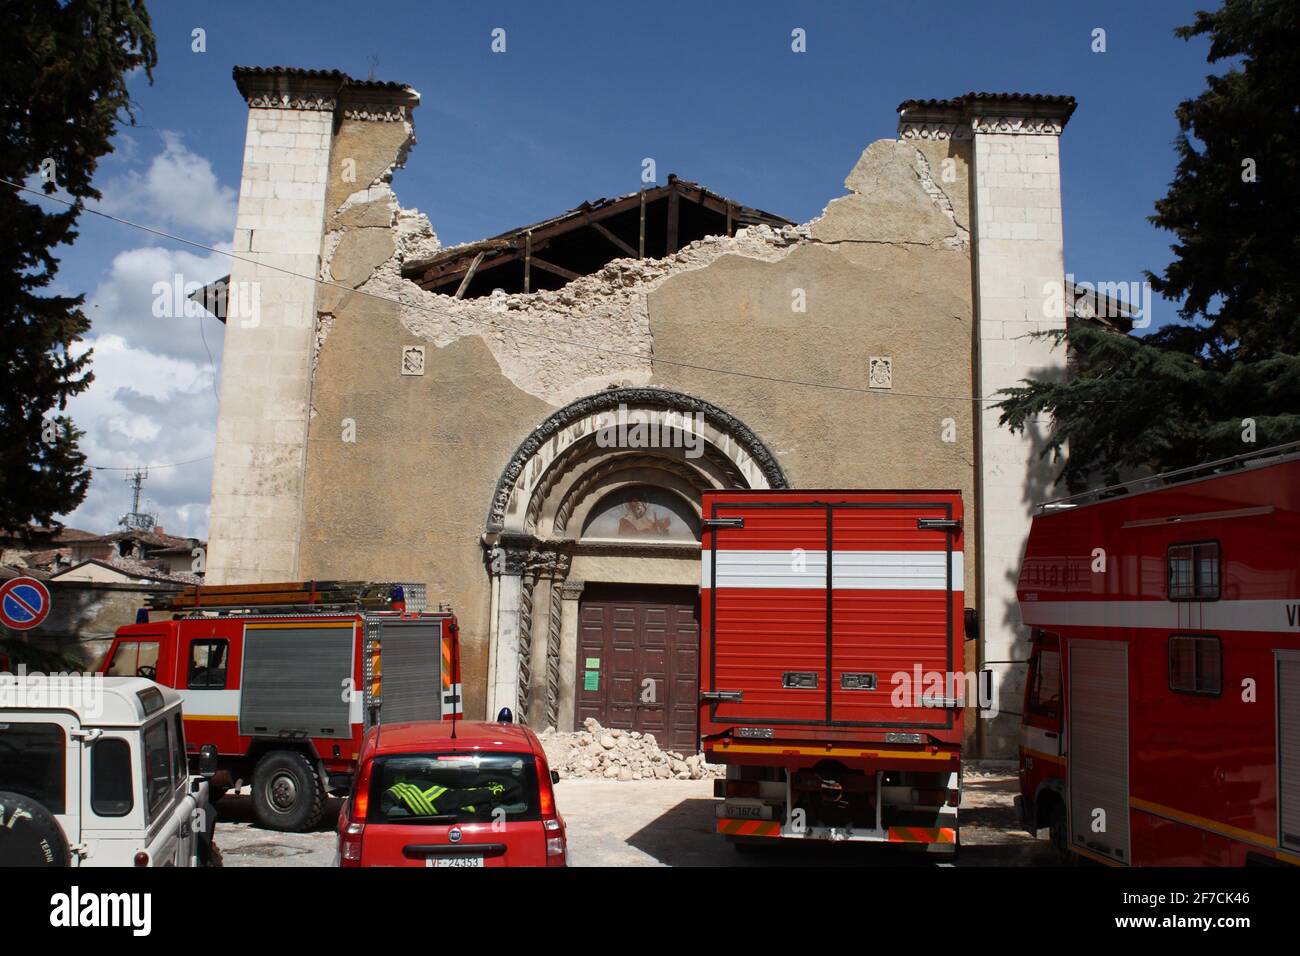 L'Aquila, Italy - April 6, 2009: The city destroyed by the earthquake Stock Photo